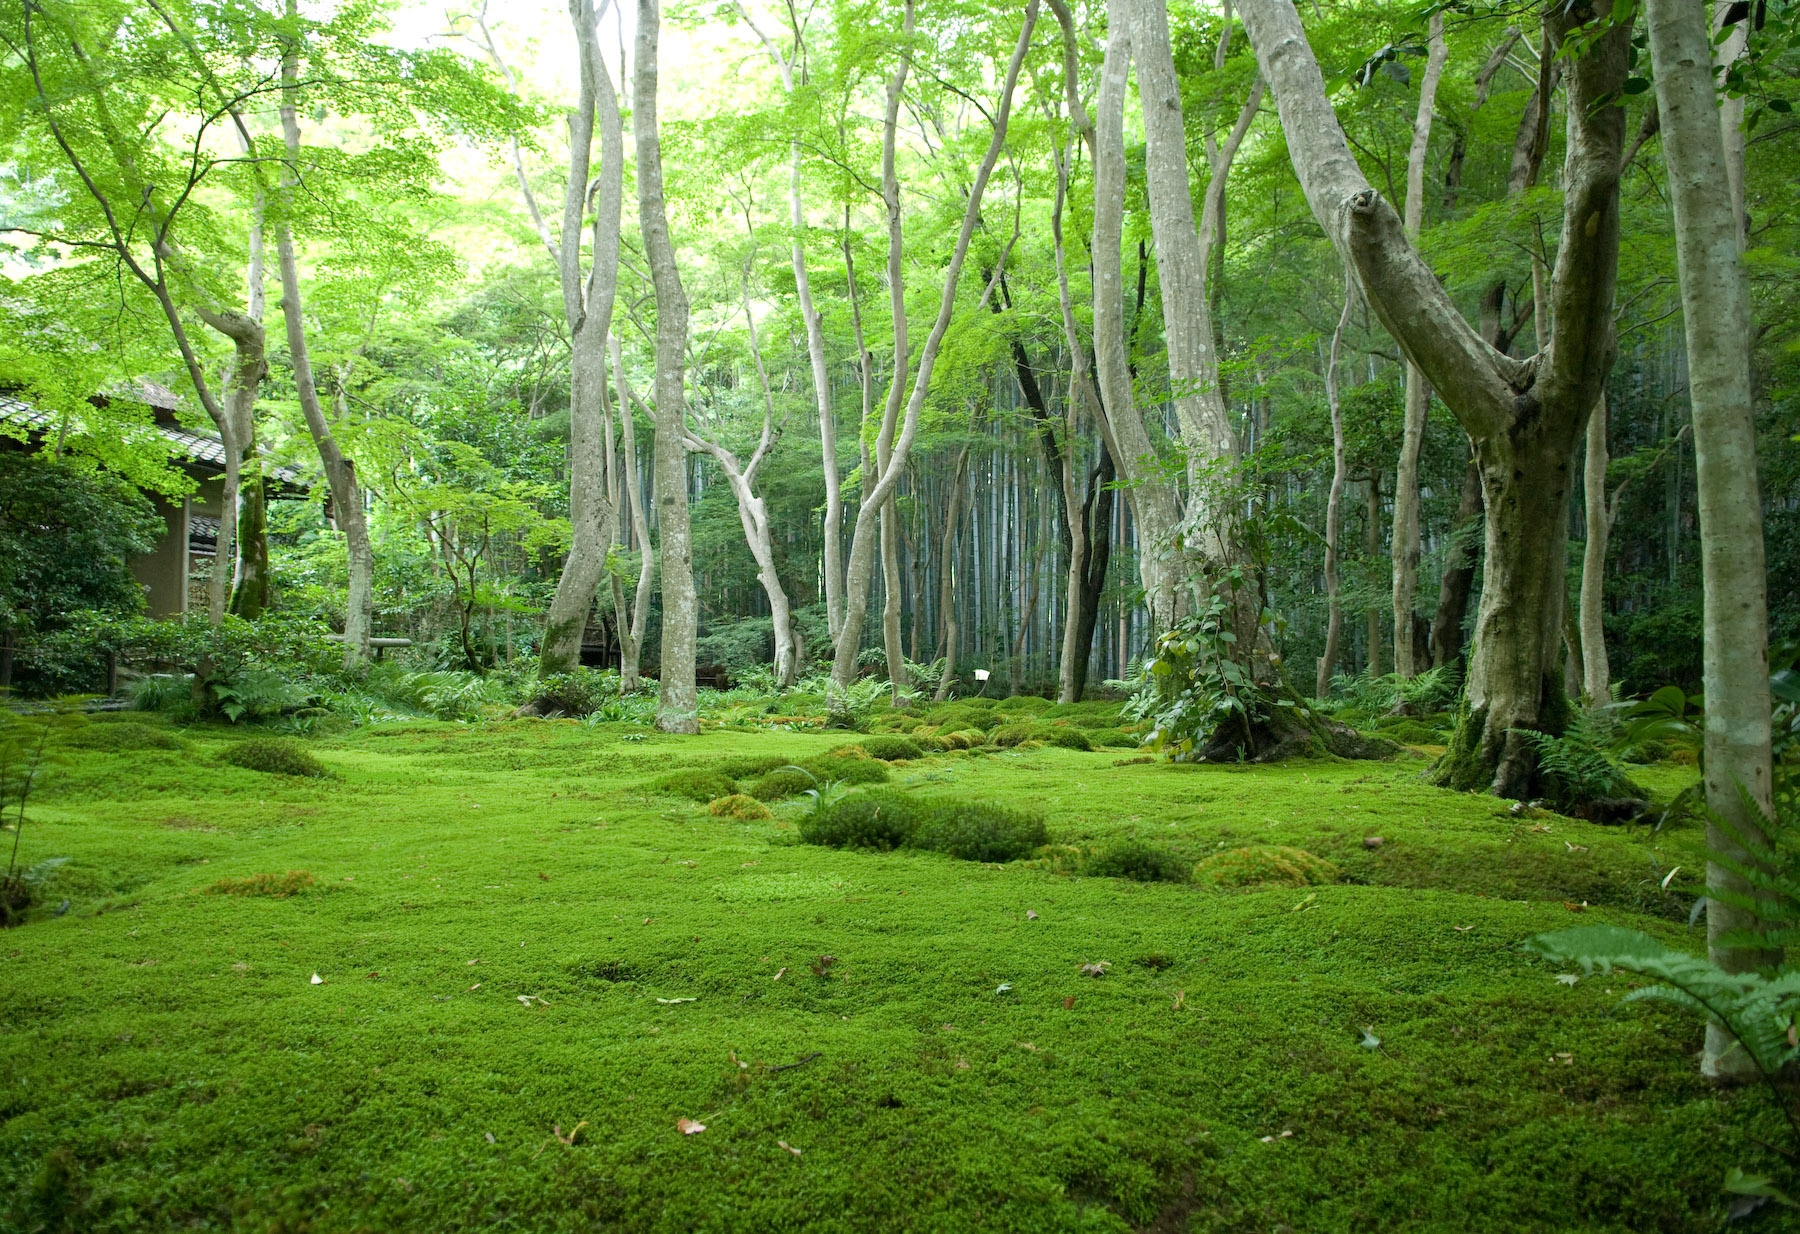 103051 download wallpaper forest, grass, nature, trees, house, moss, polyana, glade screensavers and pictures for free